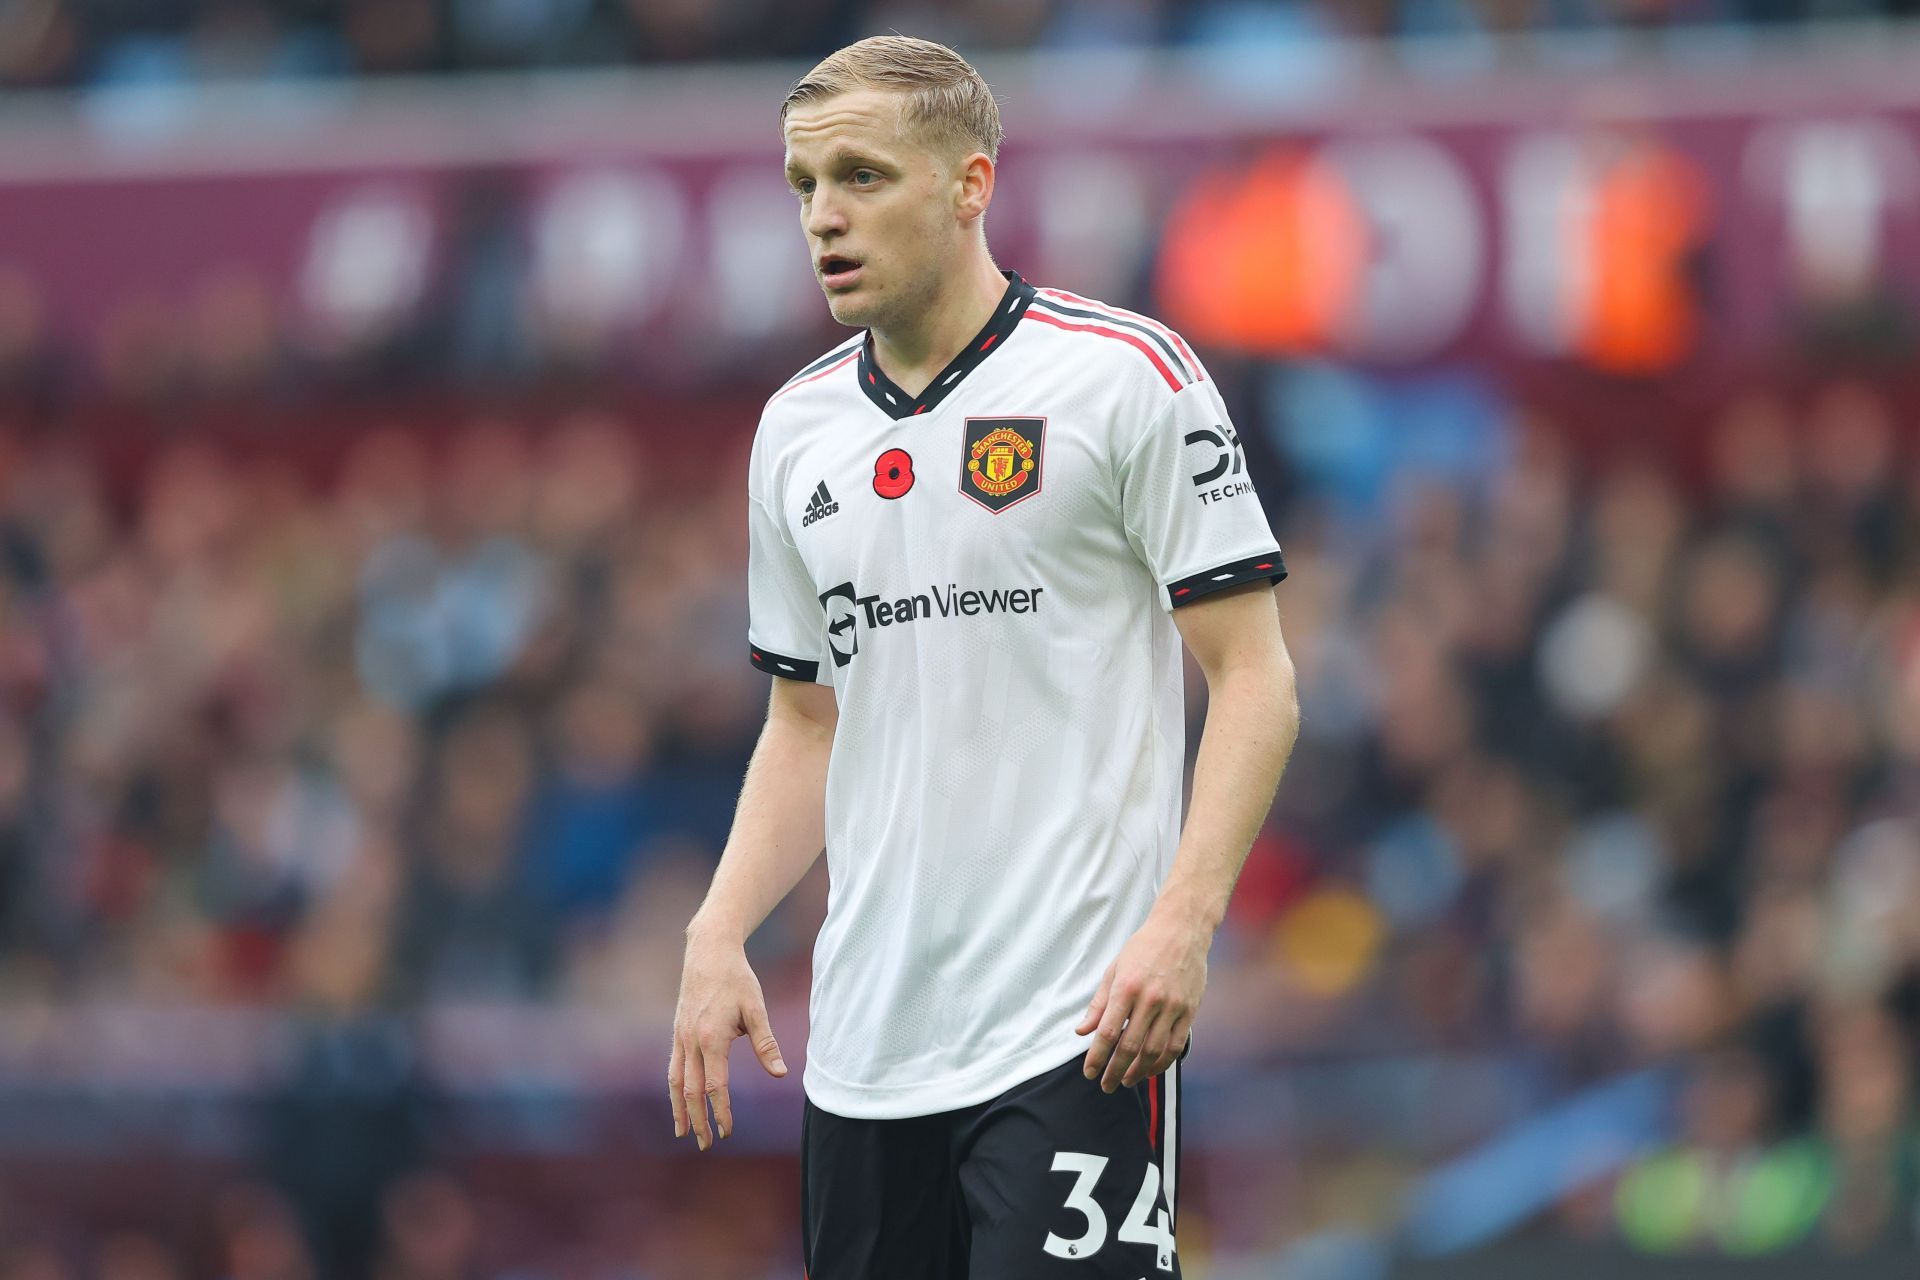 Donny van de Beek&rsquo;s time at Old Trafford could be coming to an end.